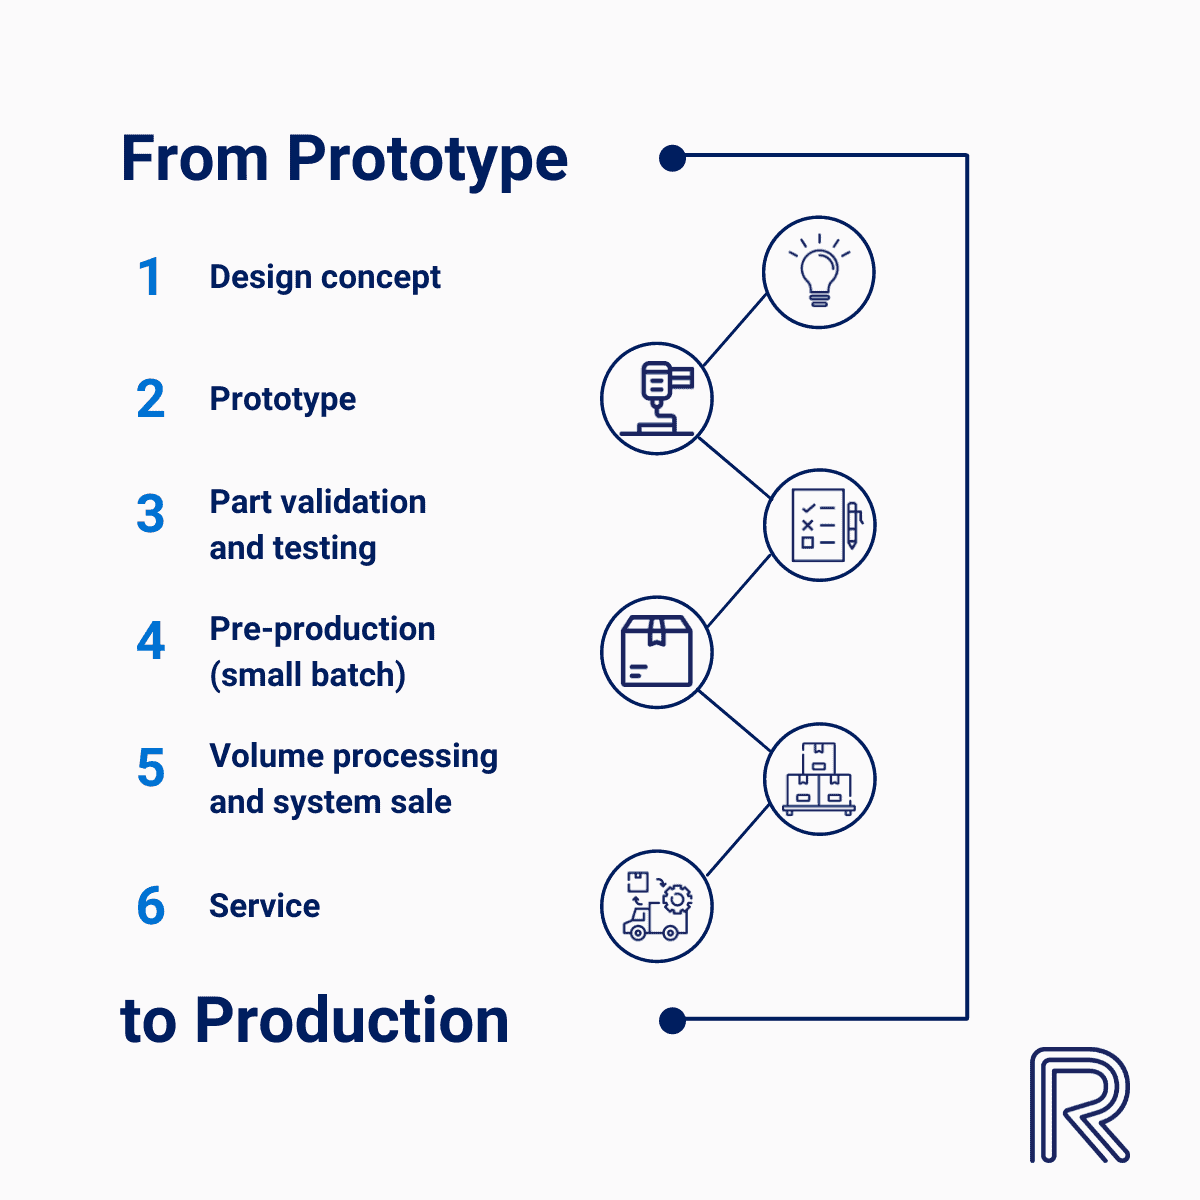 From Prototype to Production